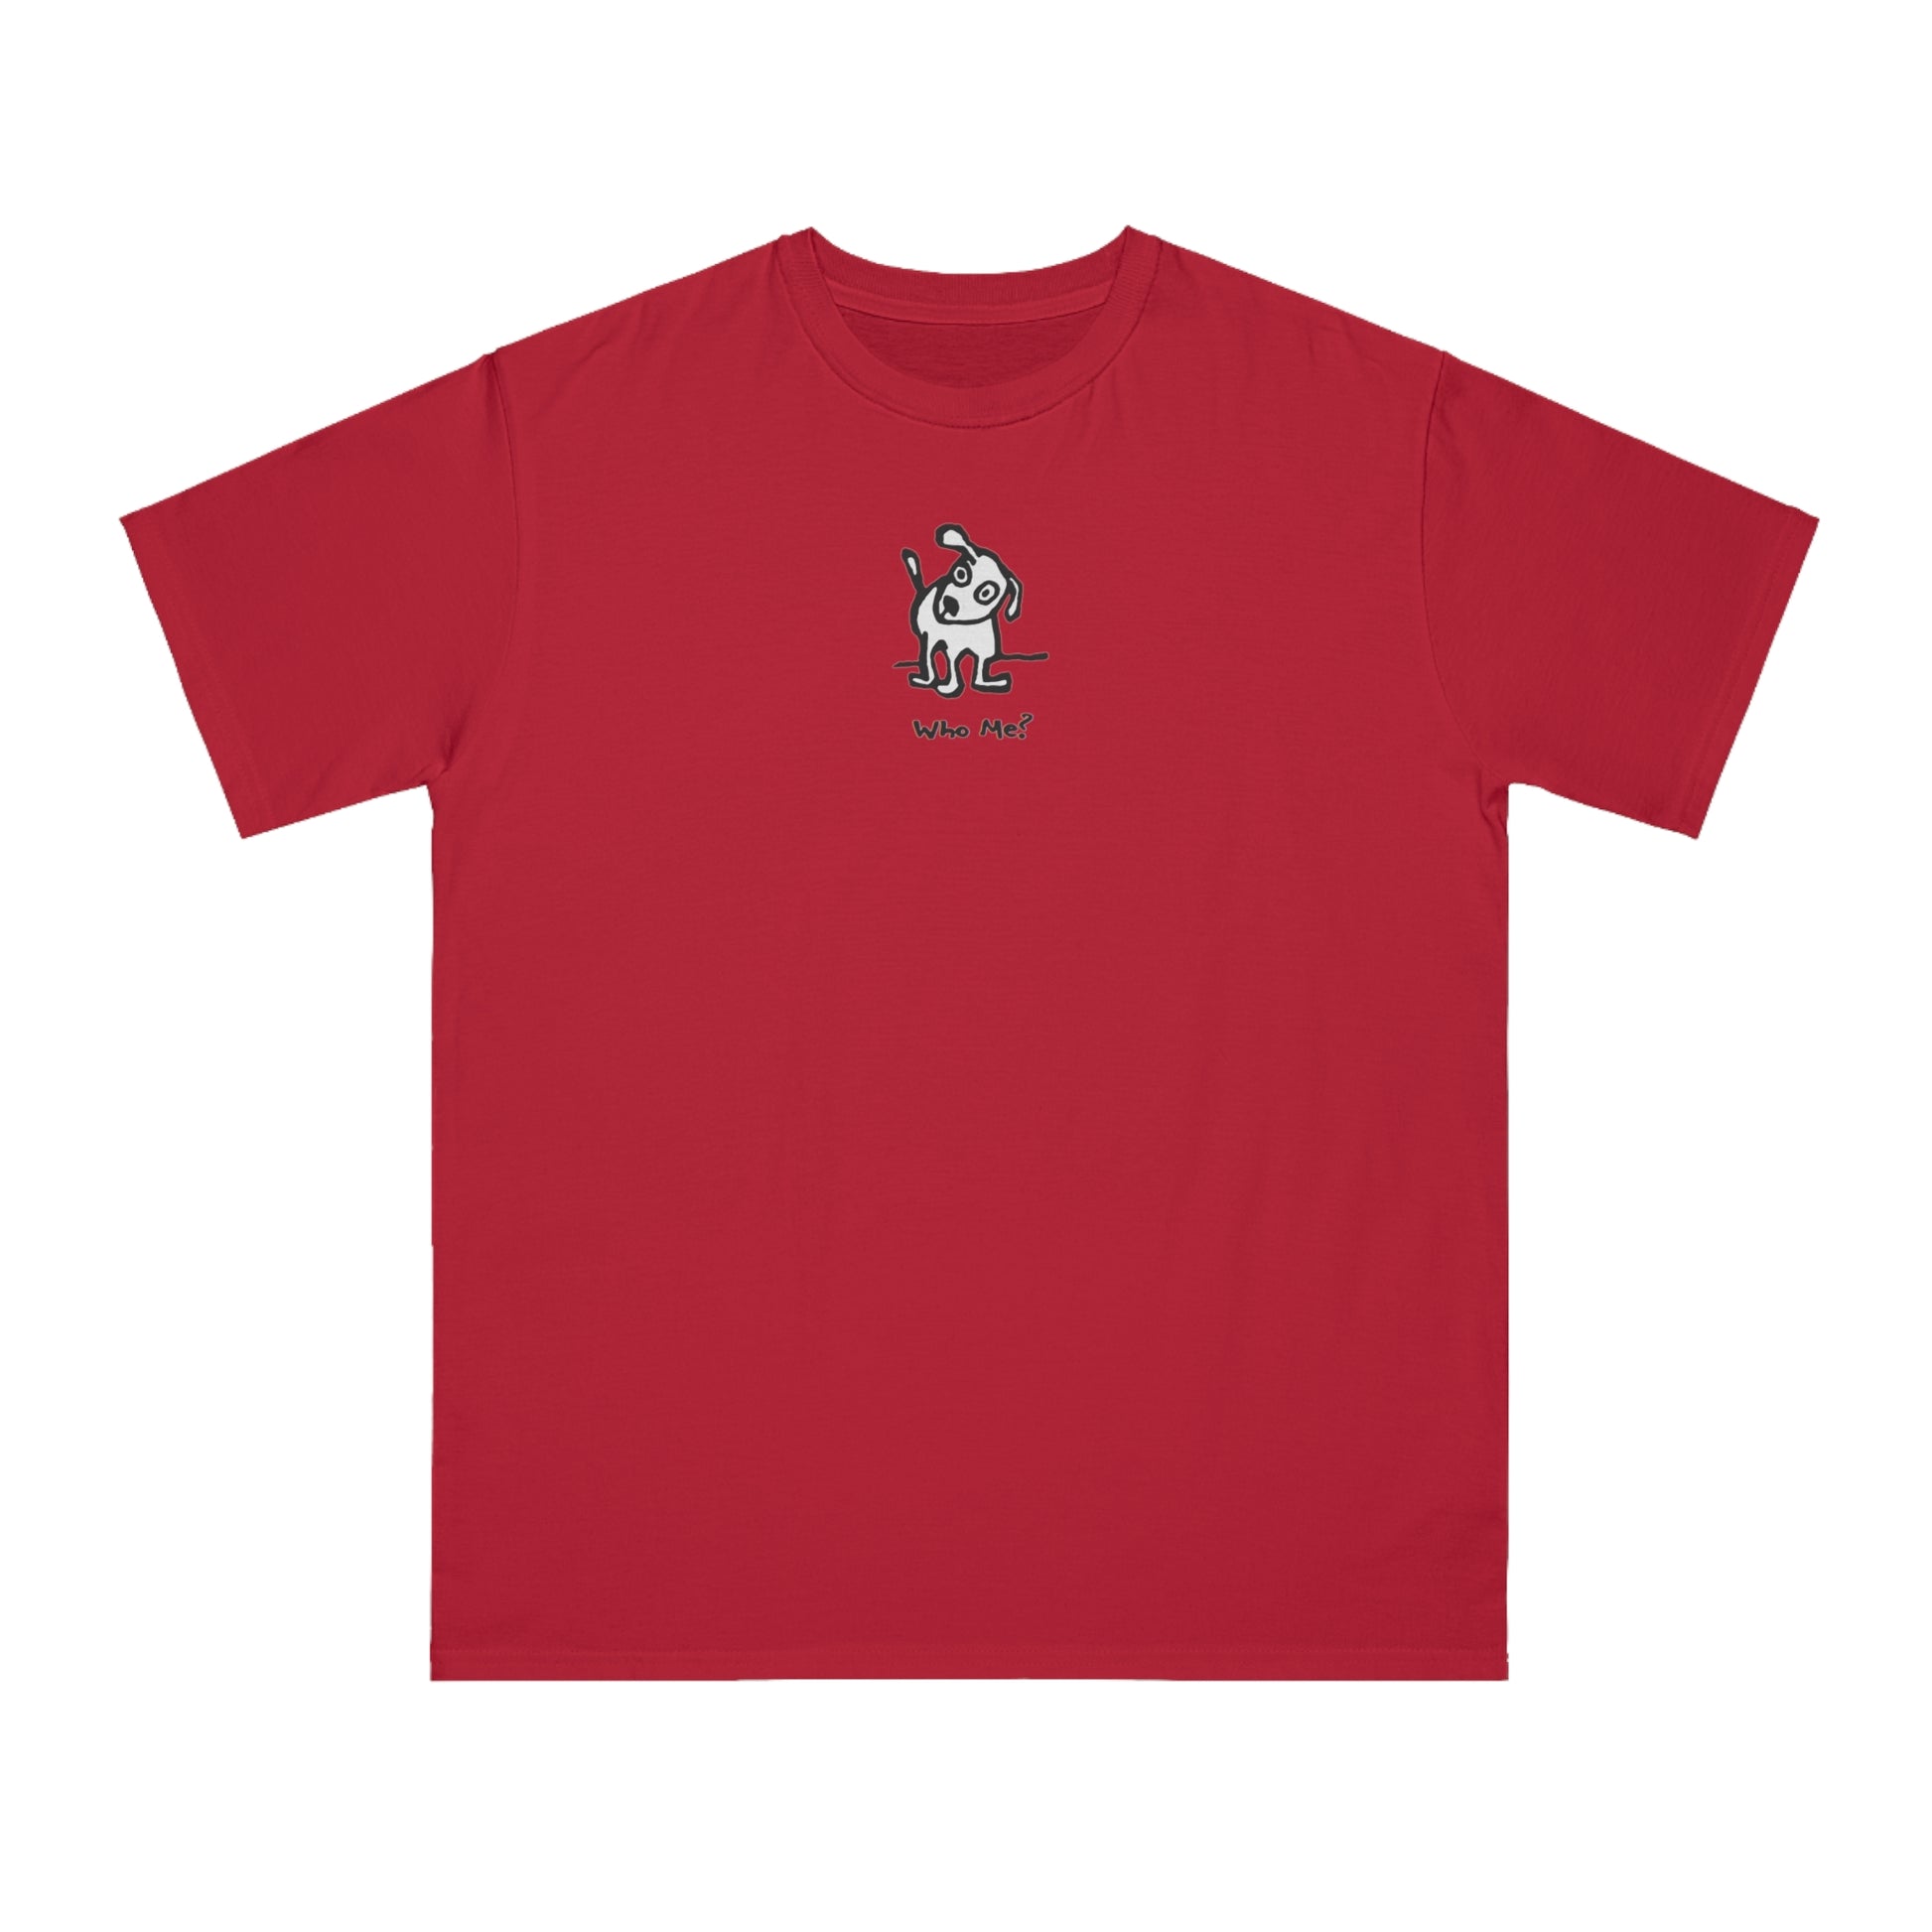 White dog with head cocked to one side on red pepper color unisex men's t-shirt. Text under image reads Who Me